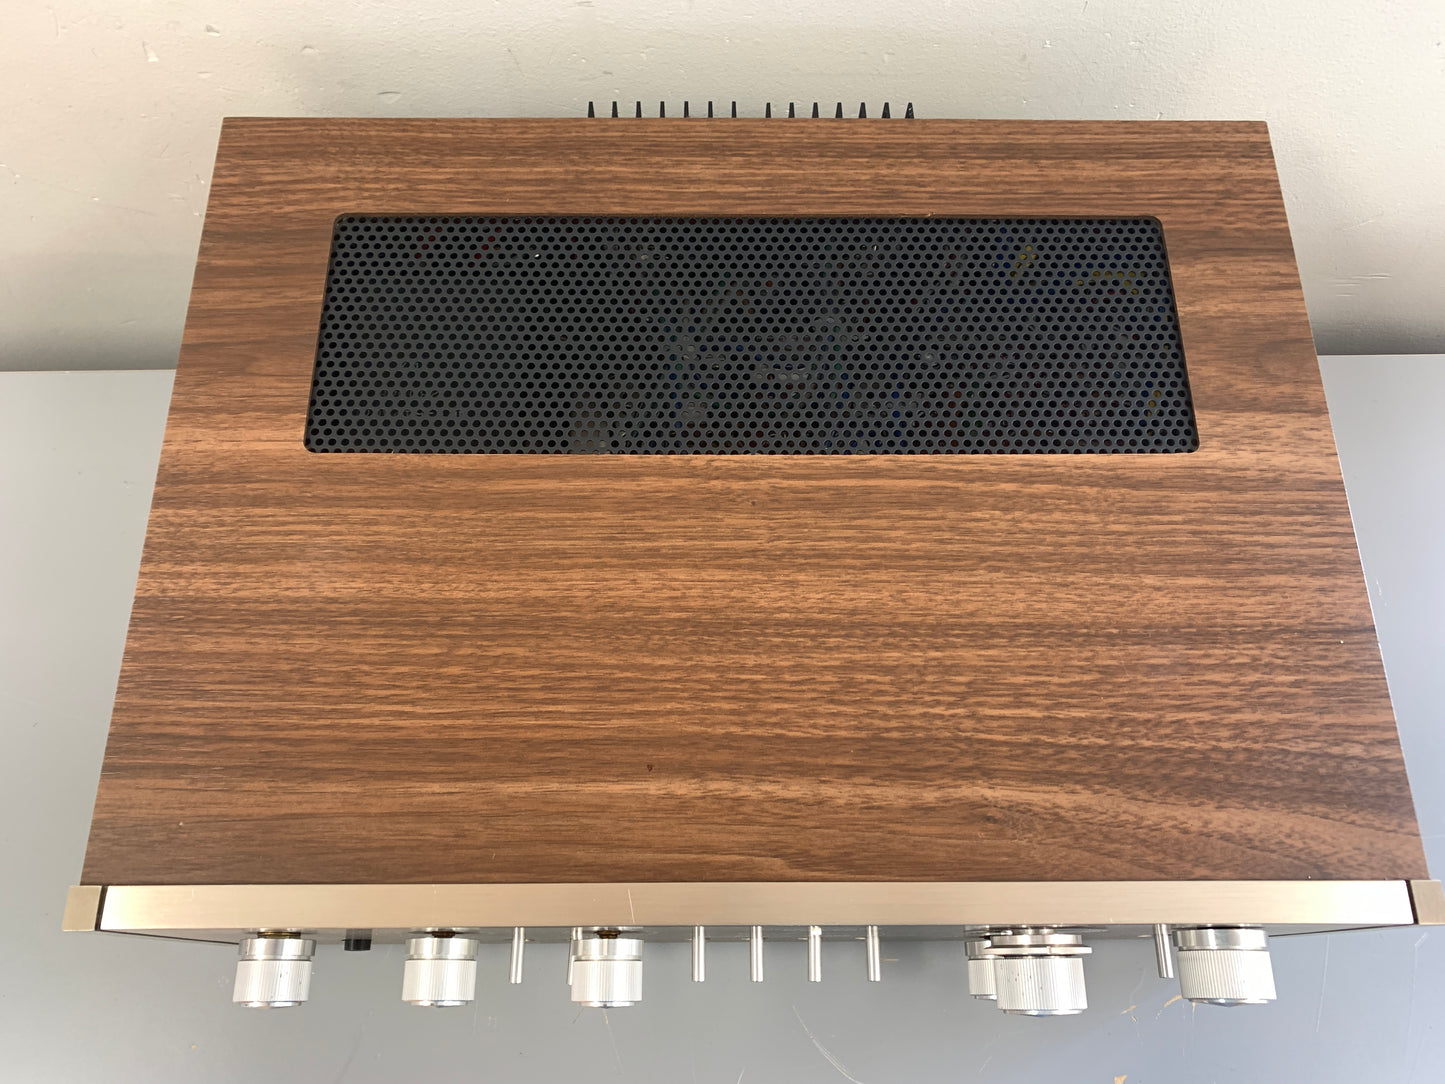 Onkyo A7055 Stereo Integrated Amplifier